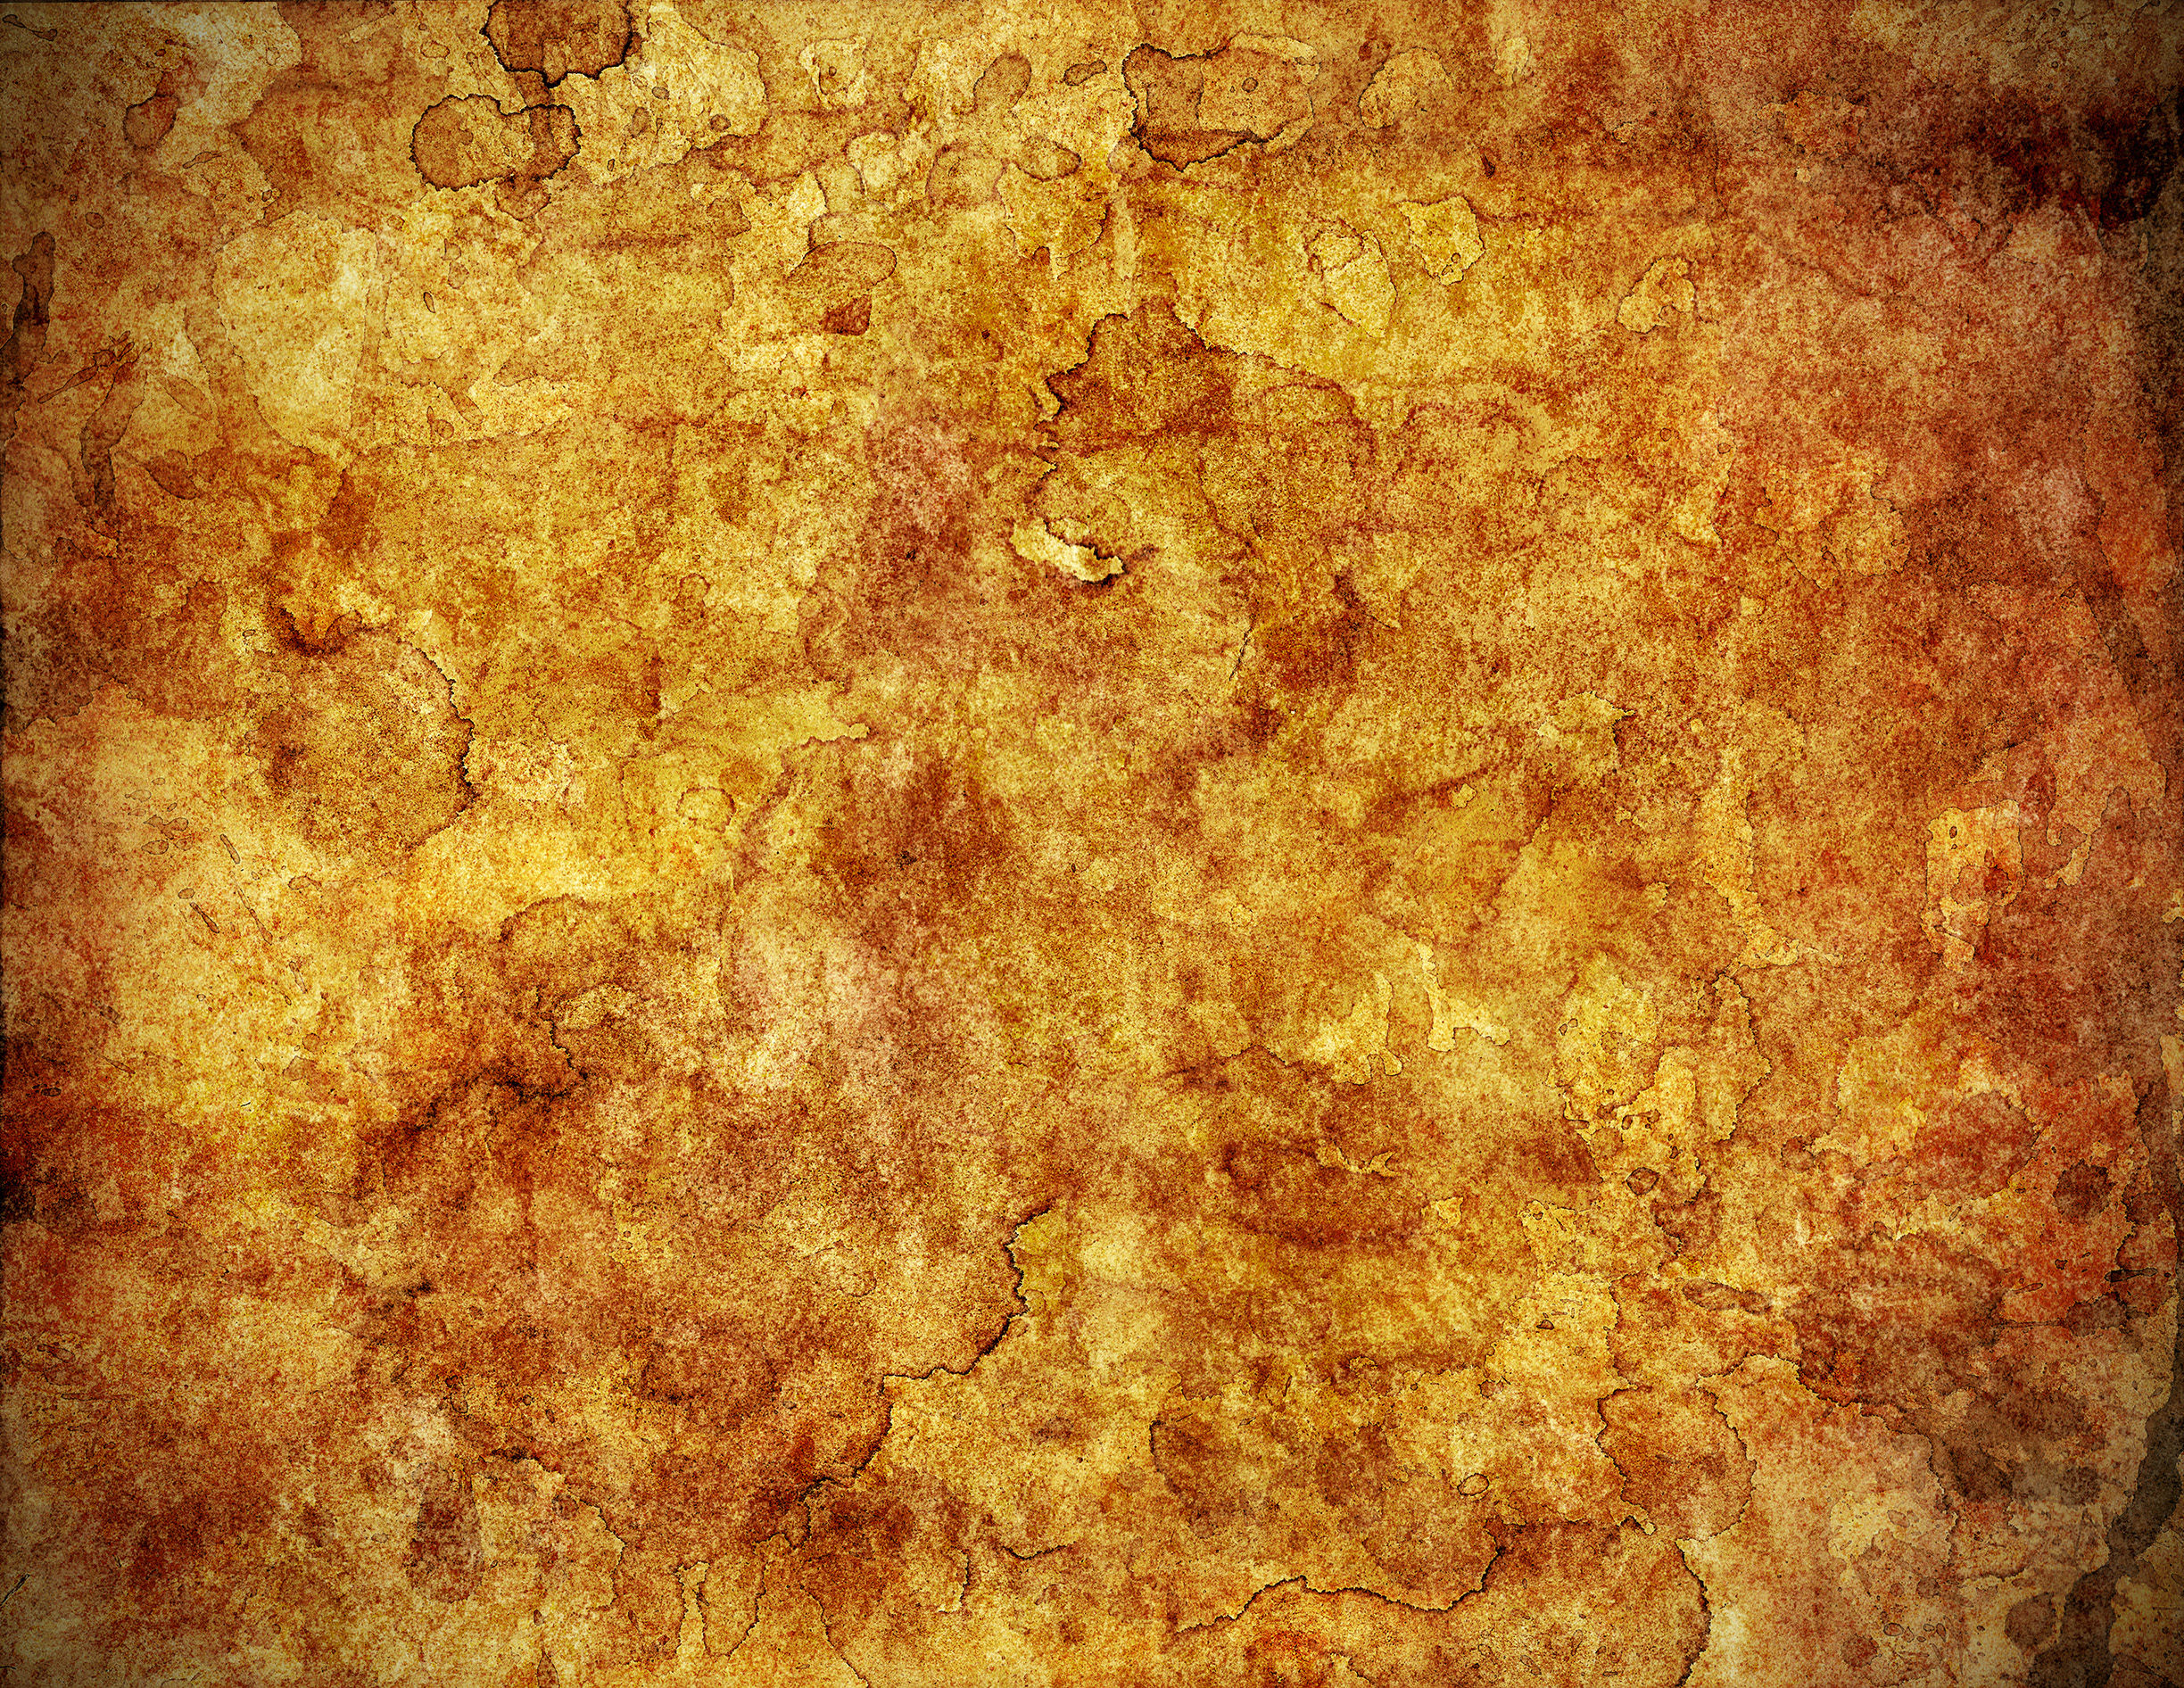 Free High Resolution Textures for Photoshop